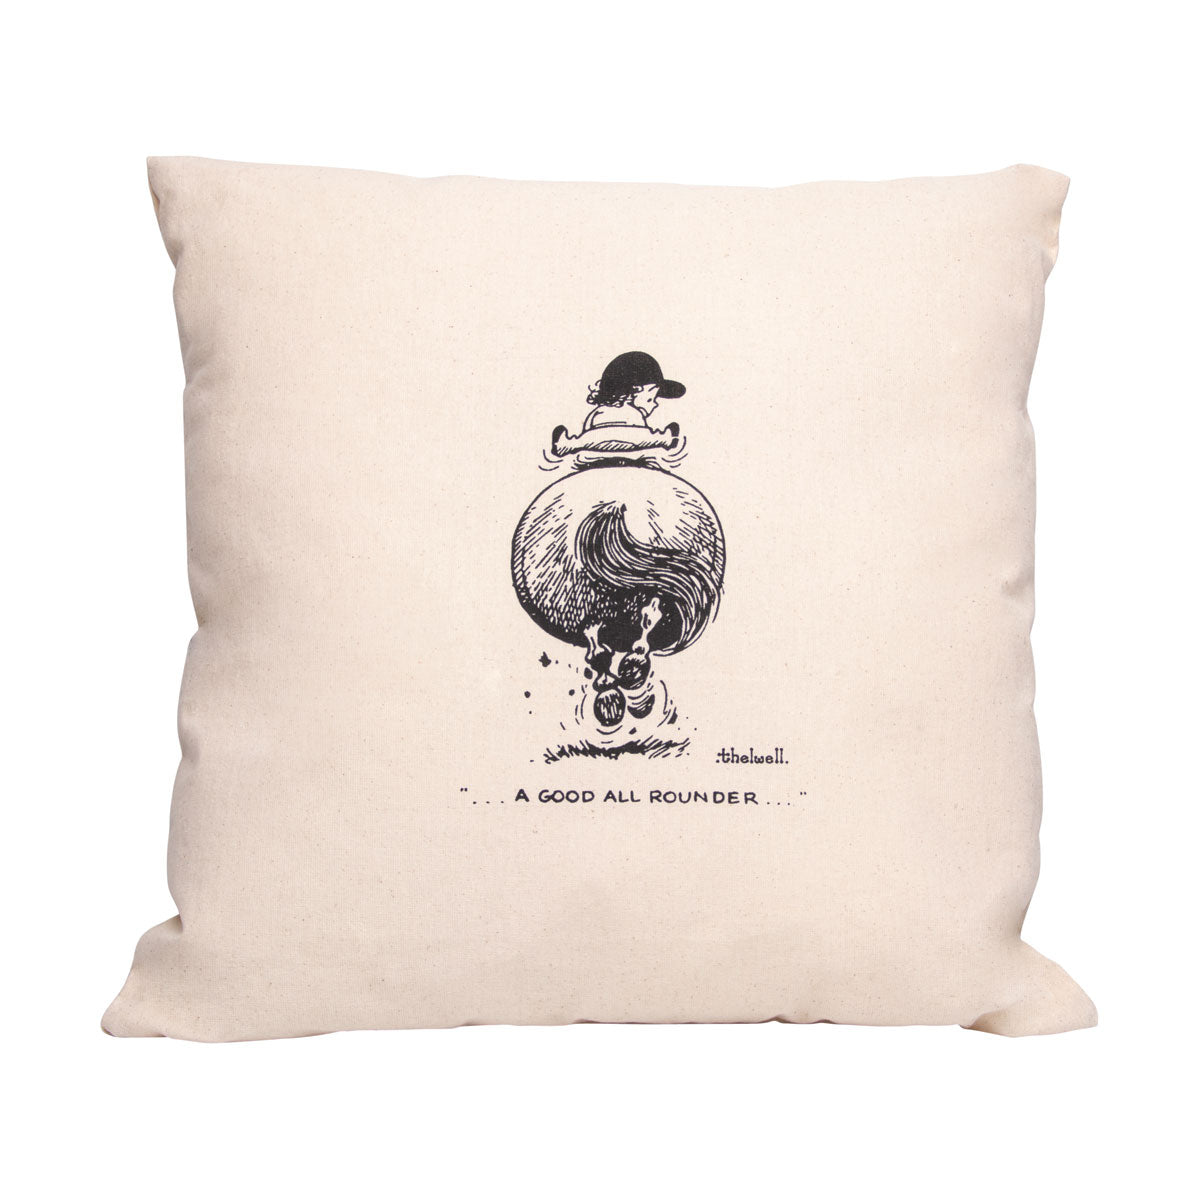 Thelwell 'A Good All Rounder' Cushion